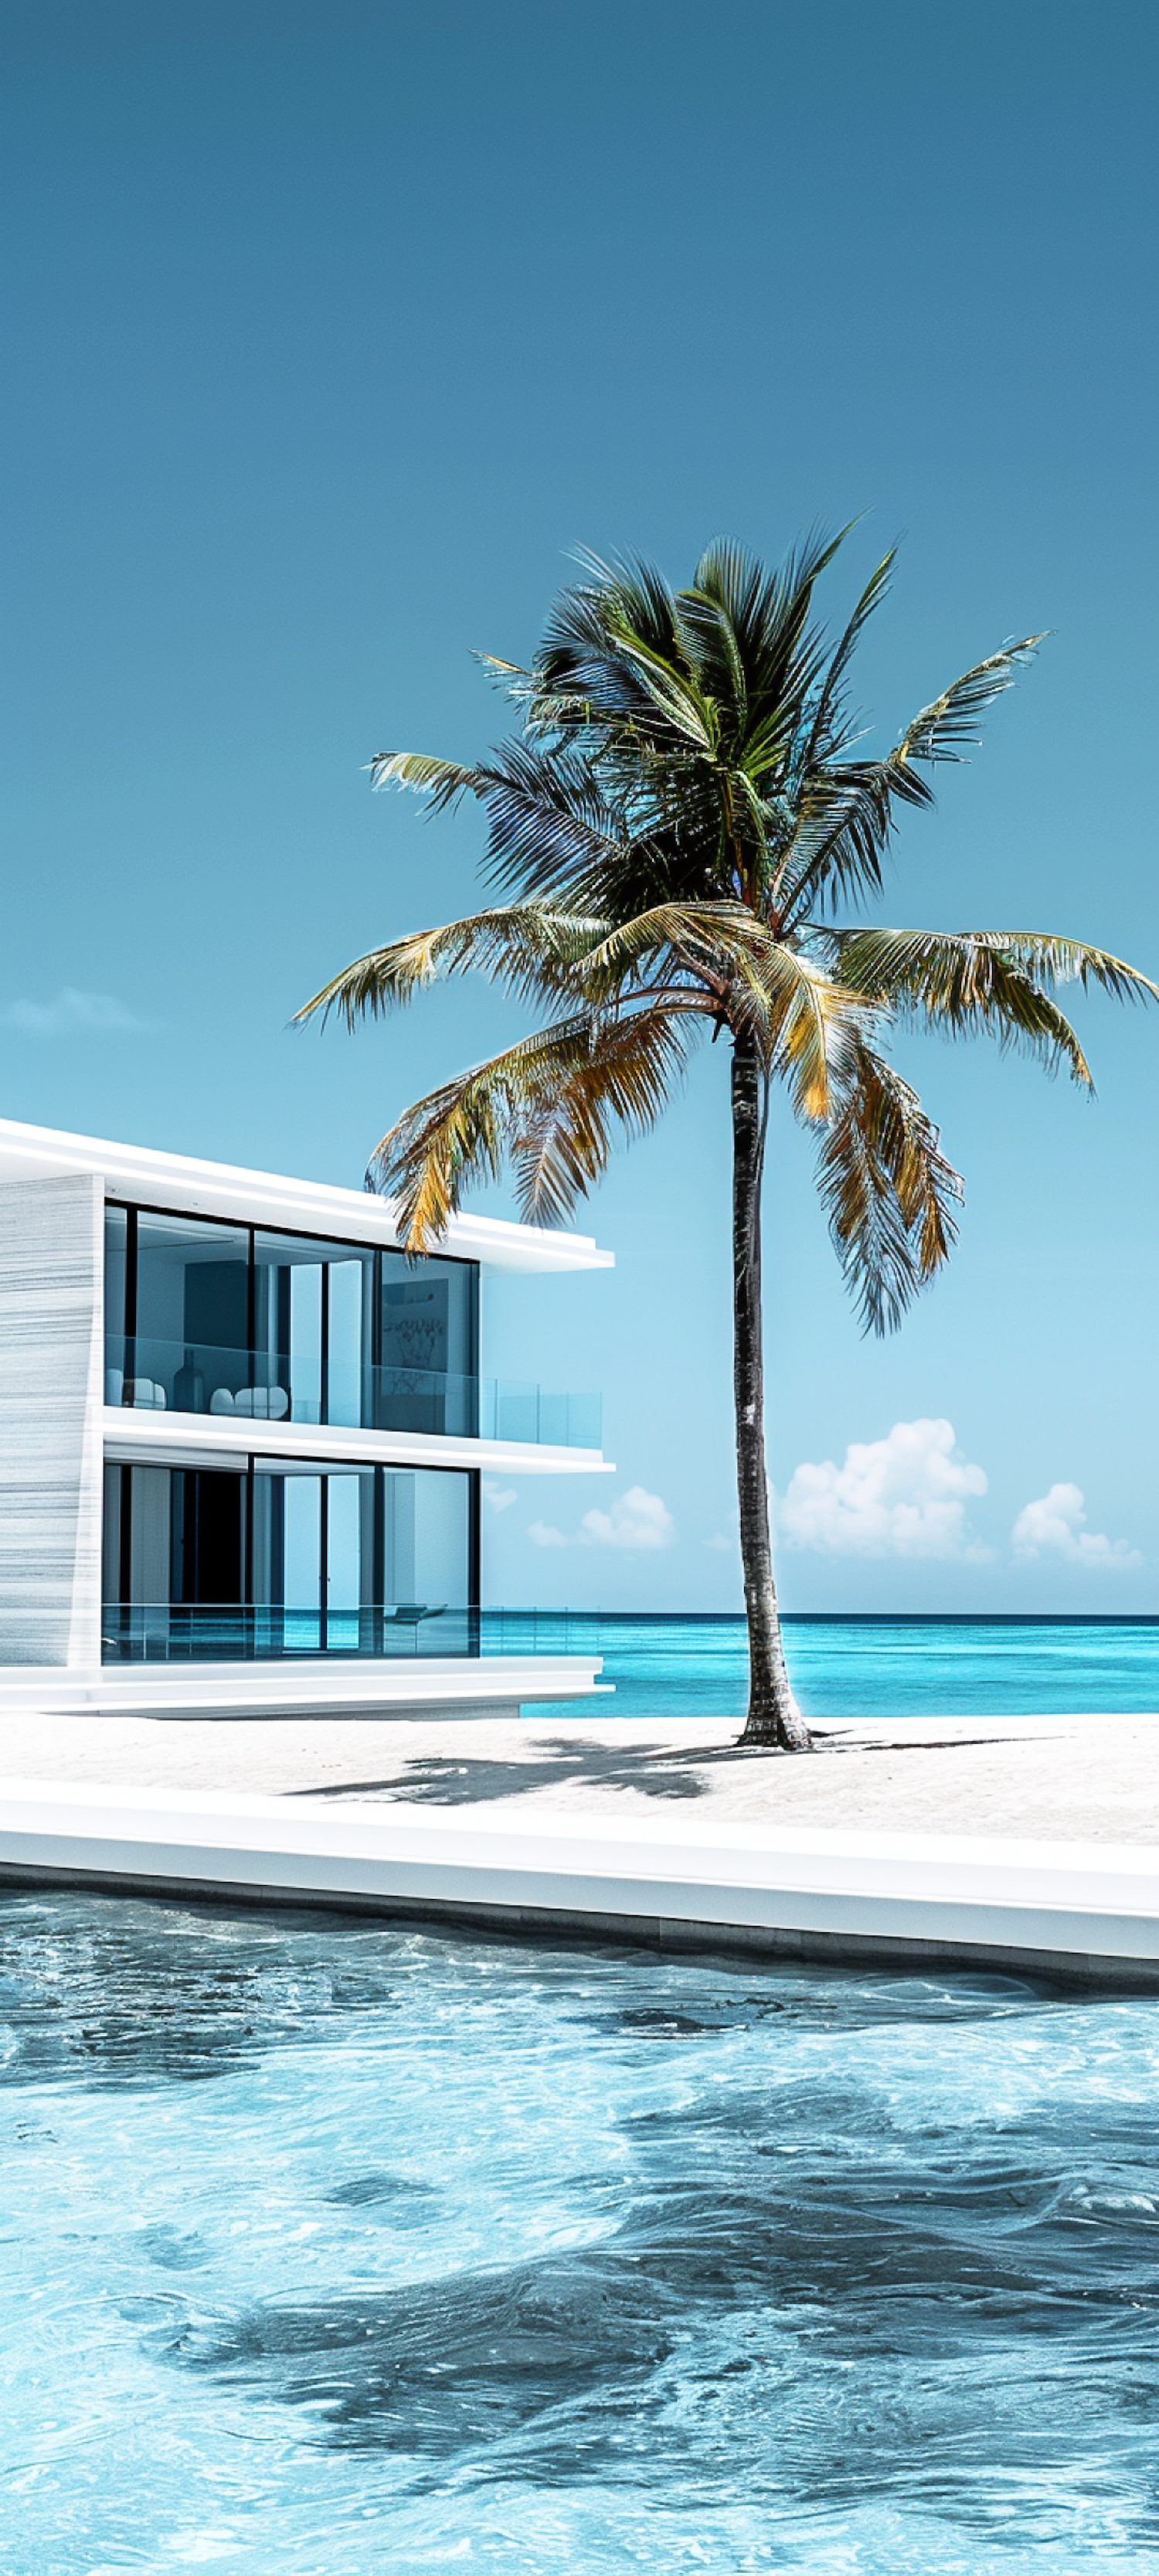 Contemporary Waterfront Architecture with Palm Tree